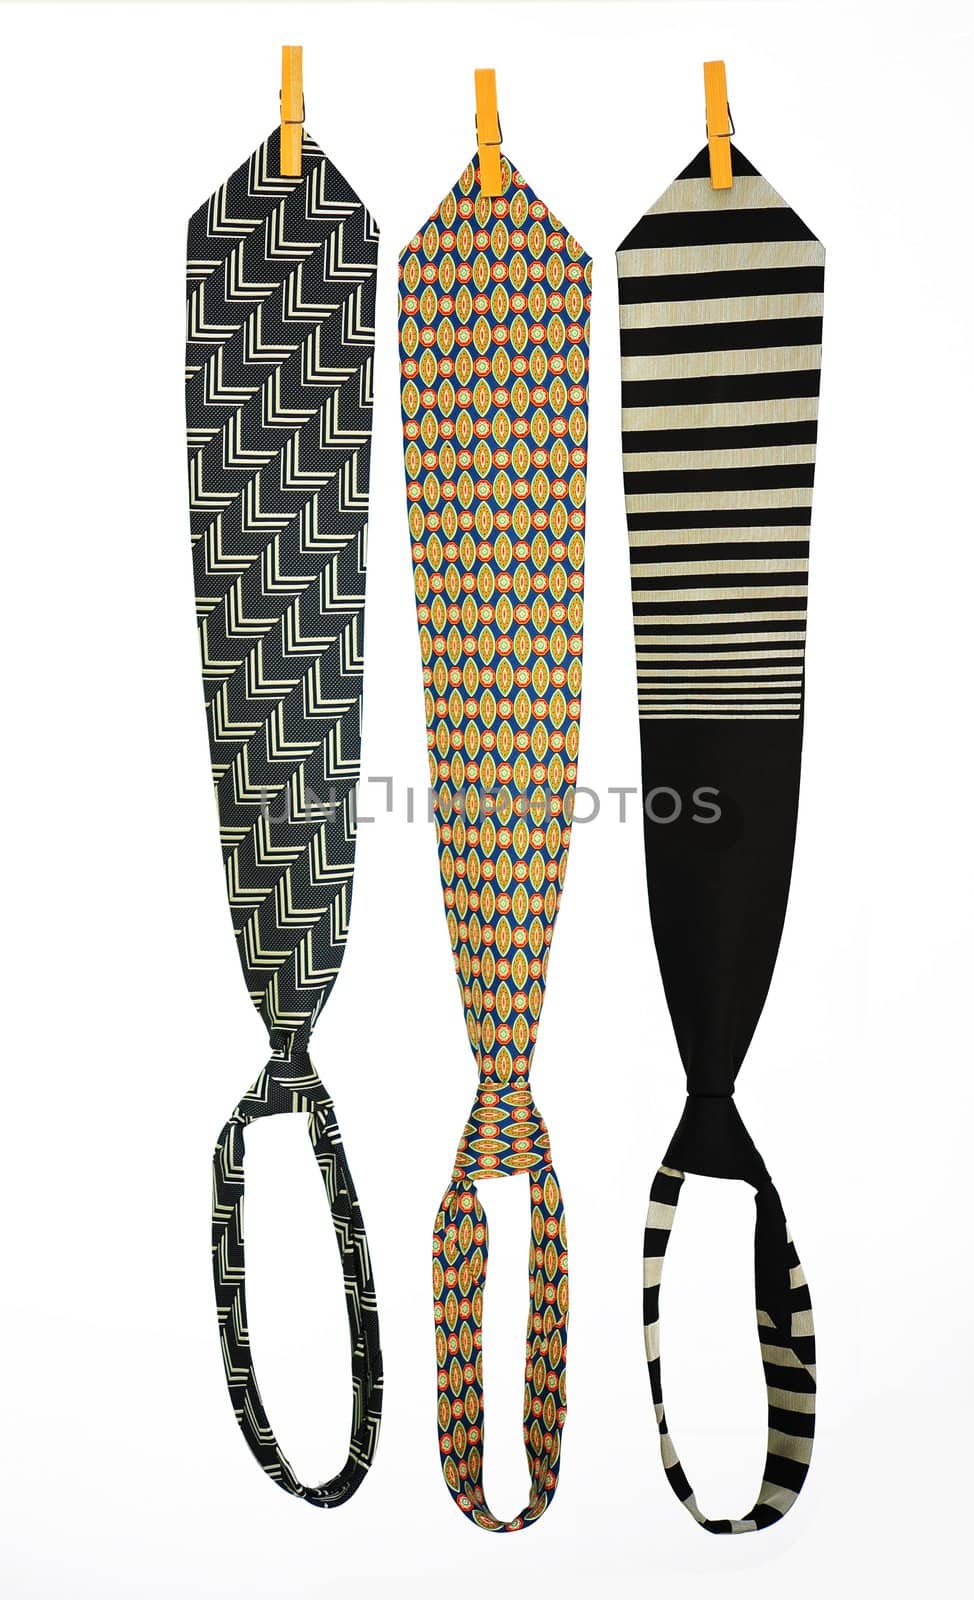 Three Ties Hanging On a Rope With Wooden Pegs